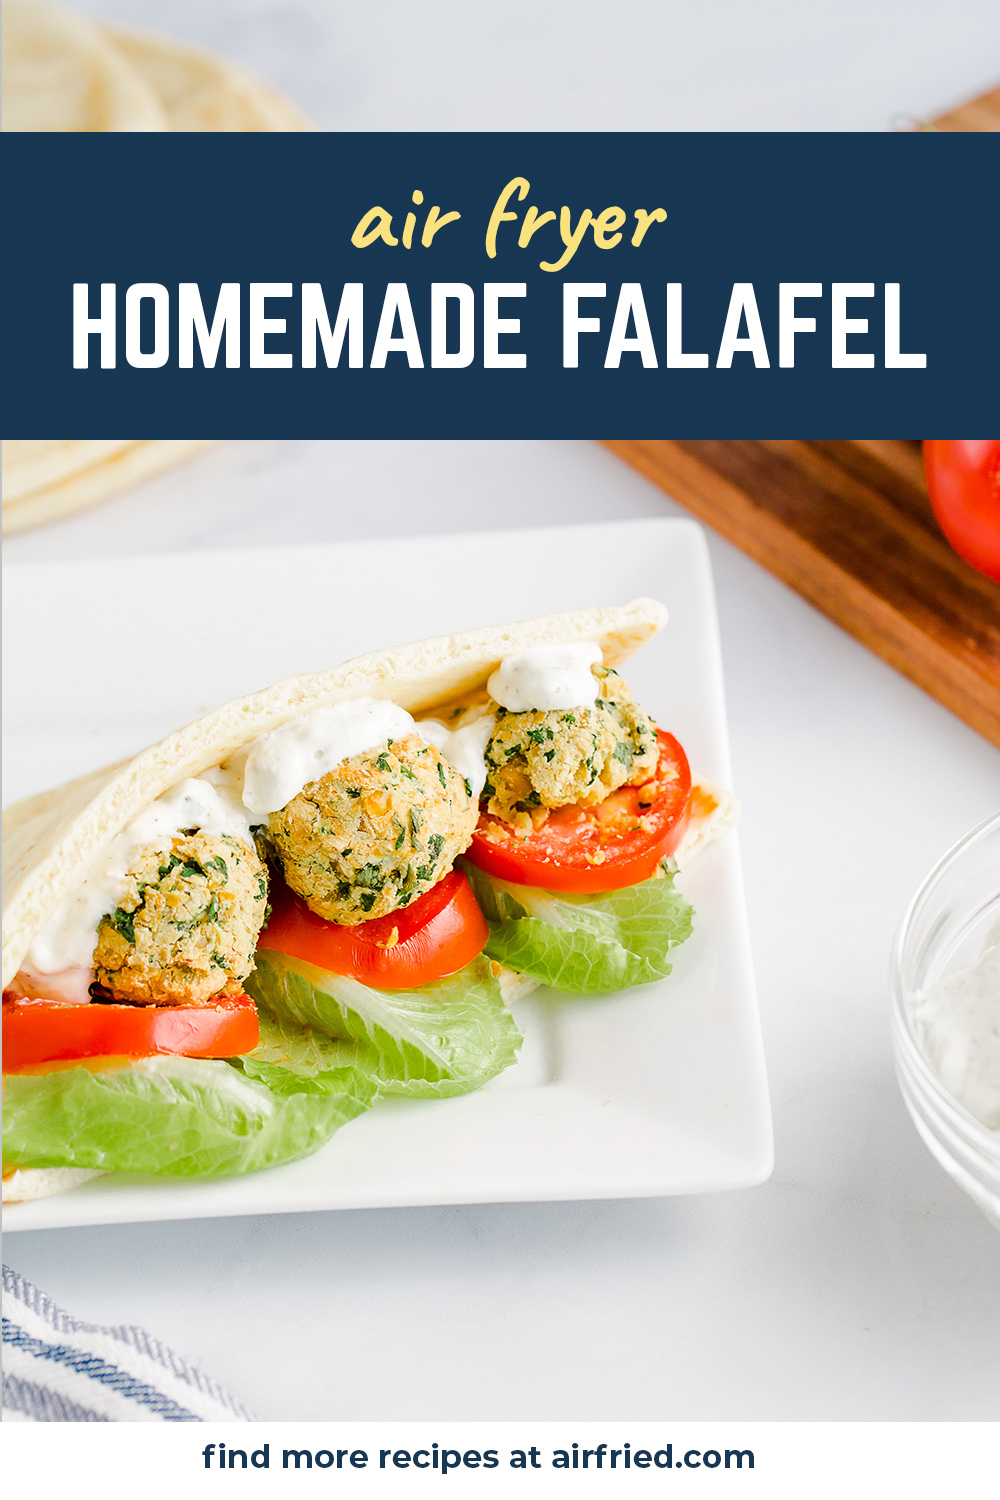 Falafel in a pita wrap with lettuce and tomatoes.